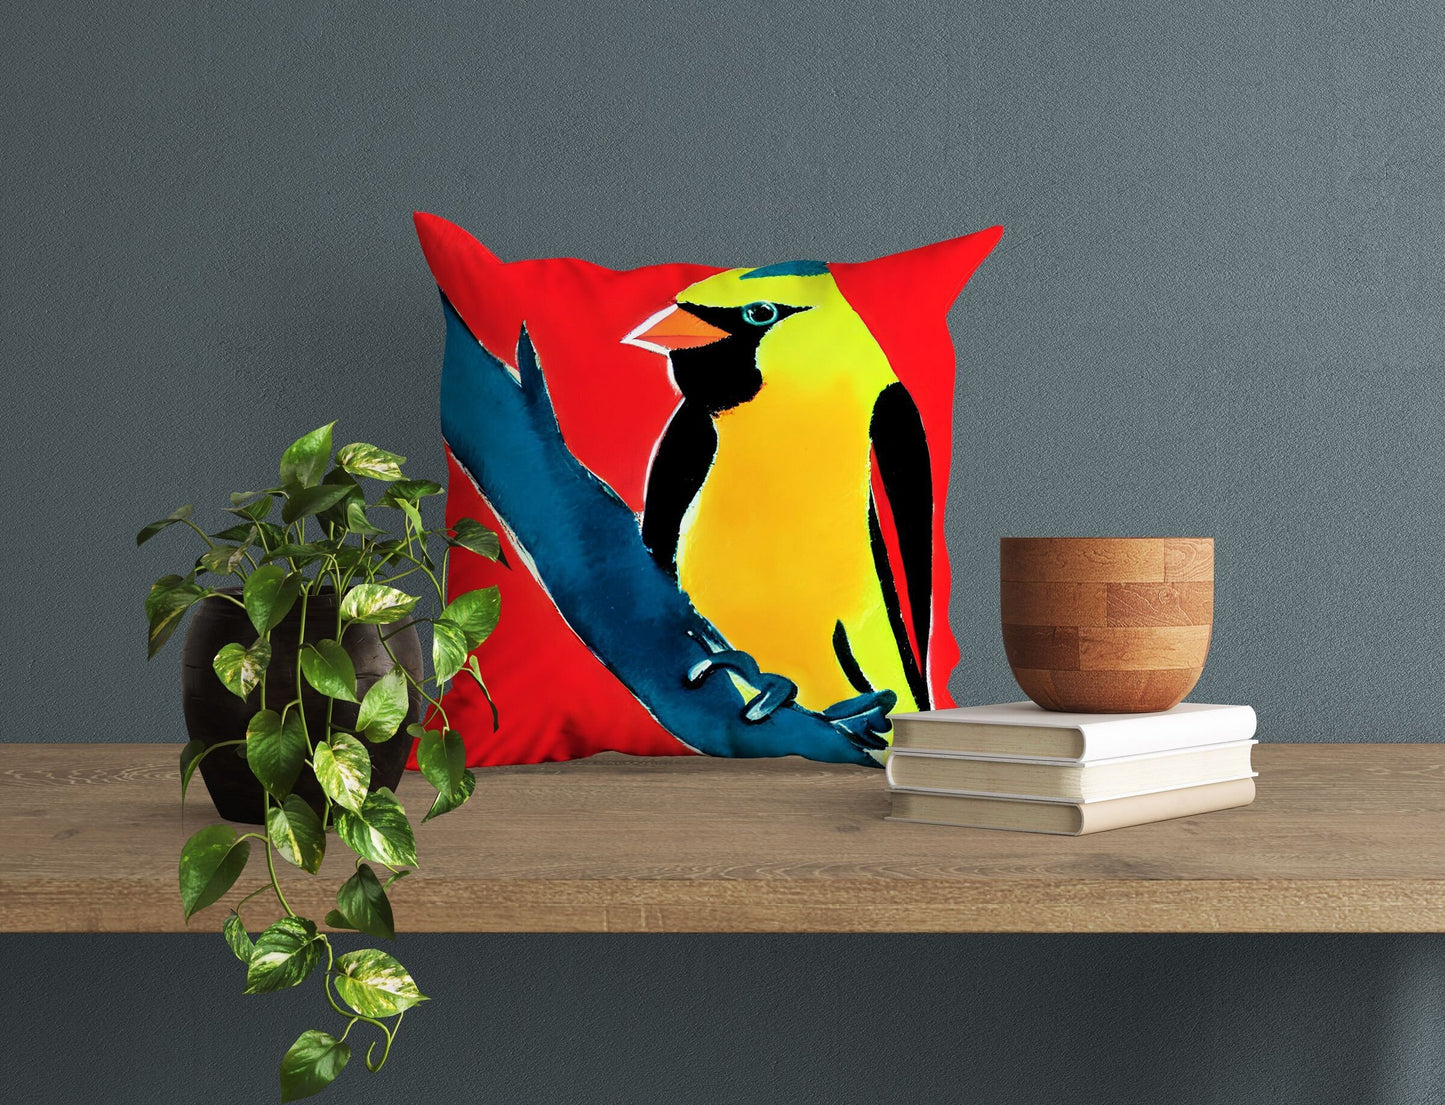 North American Cardinals Female Bird Toss Pillow, Abstract Throw Pillow, Soft Pillow Cases, Colorful Pillow Case, Contemporary Pillow